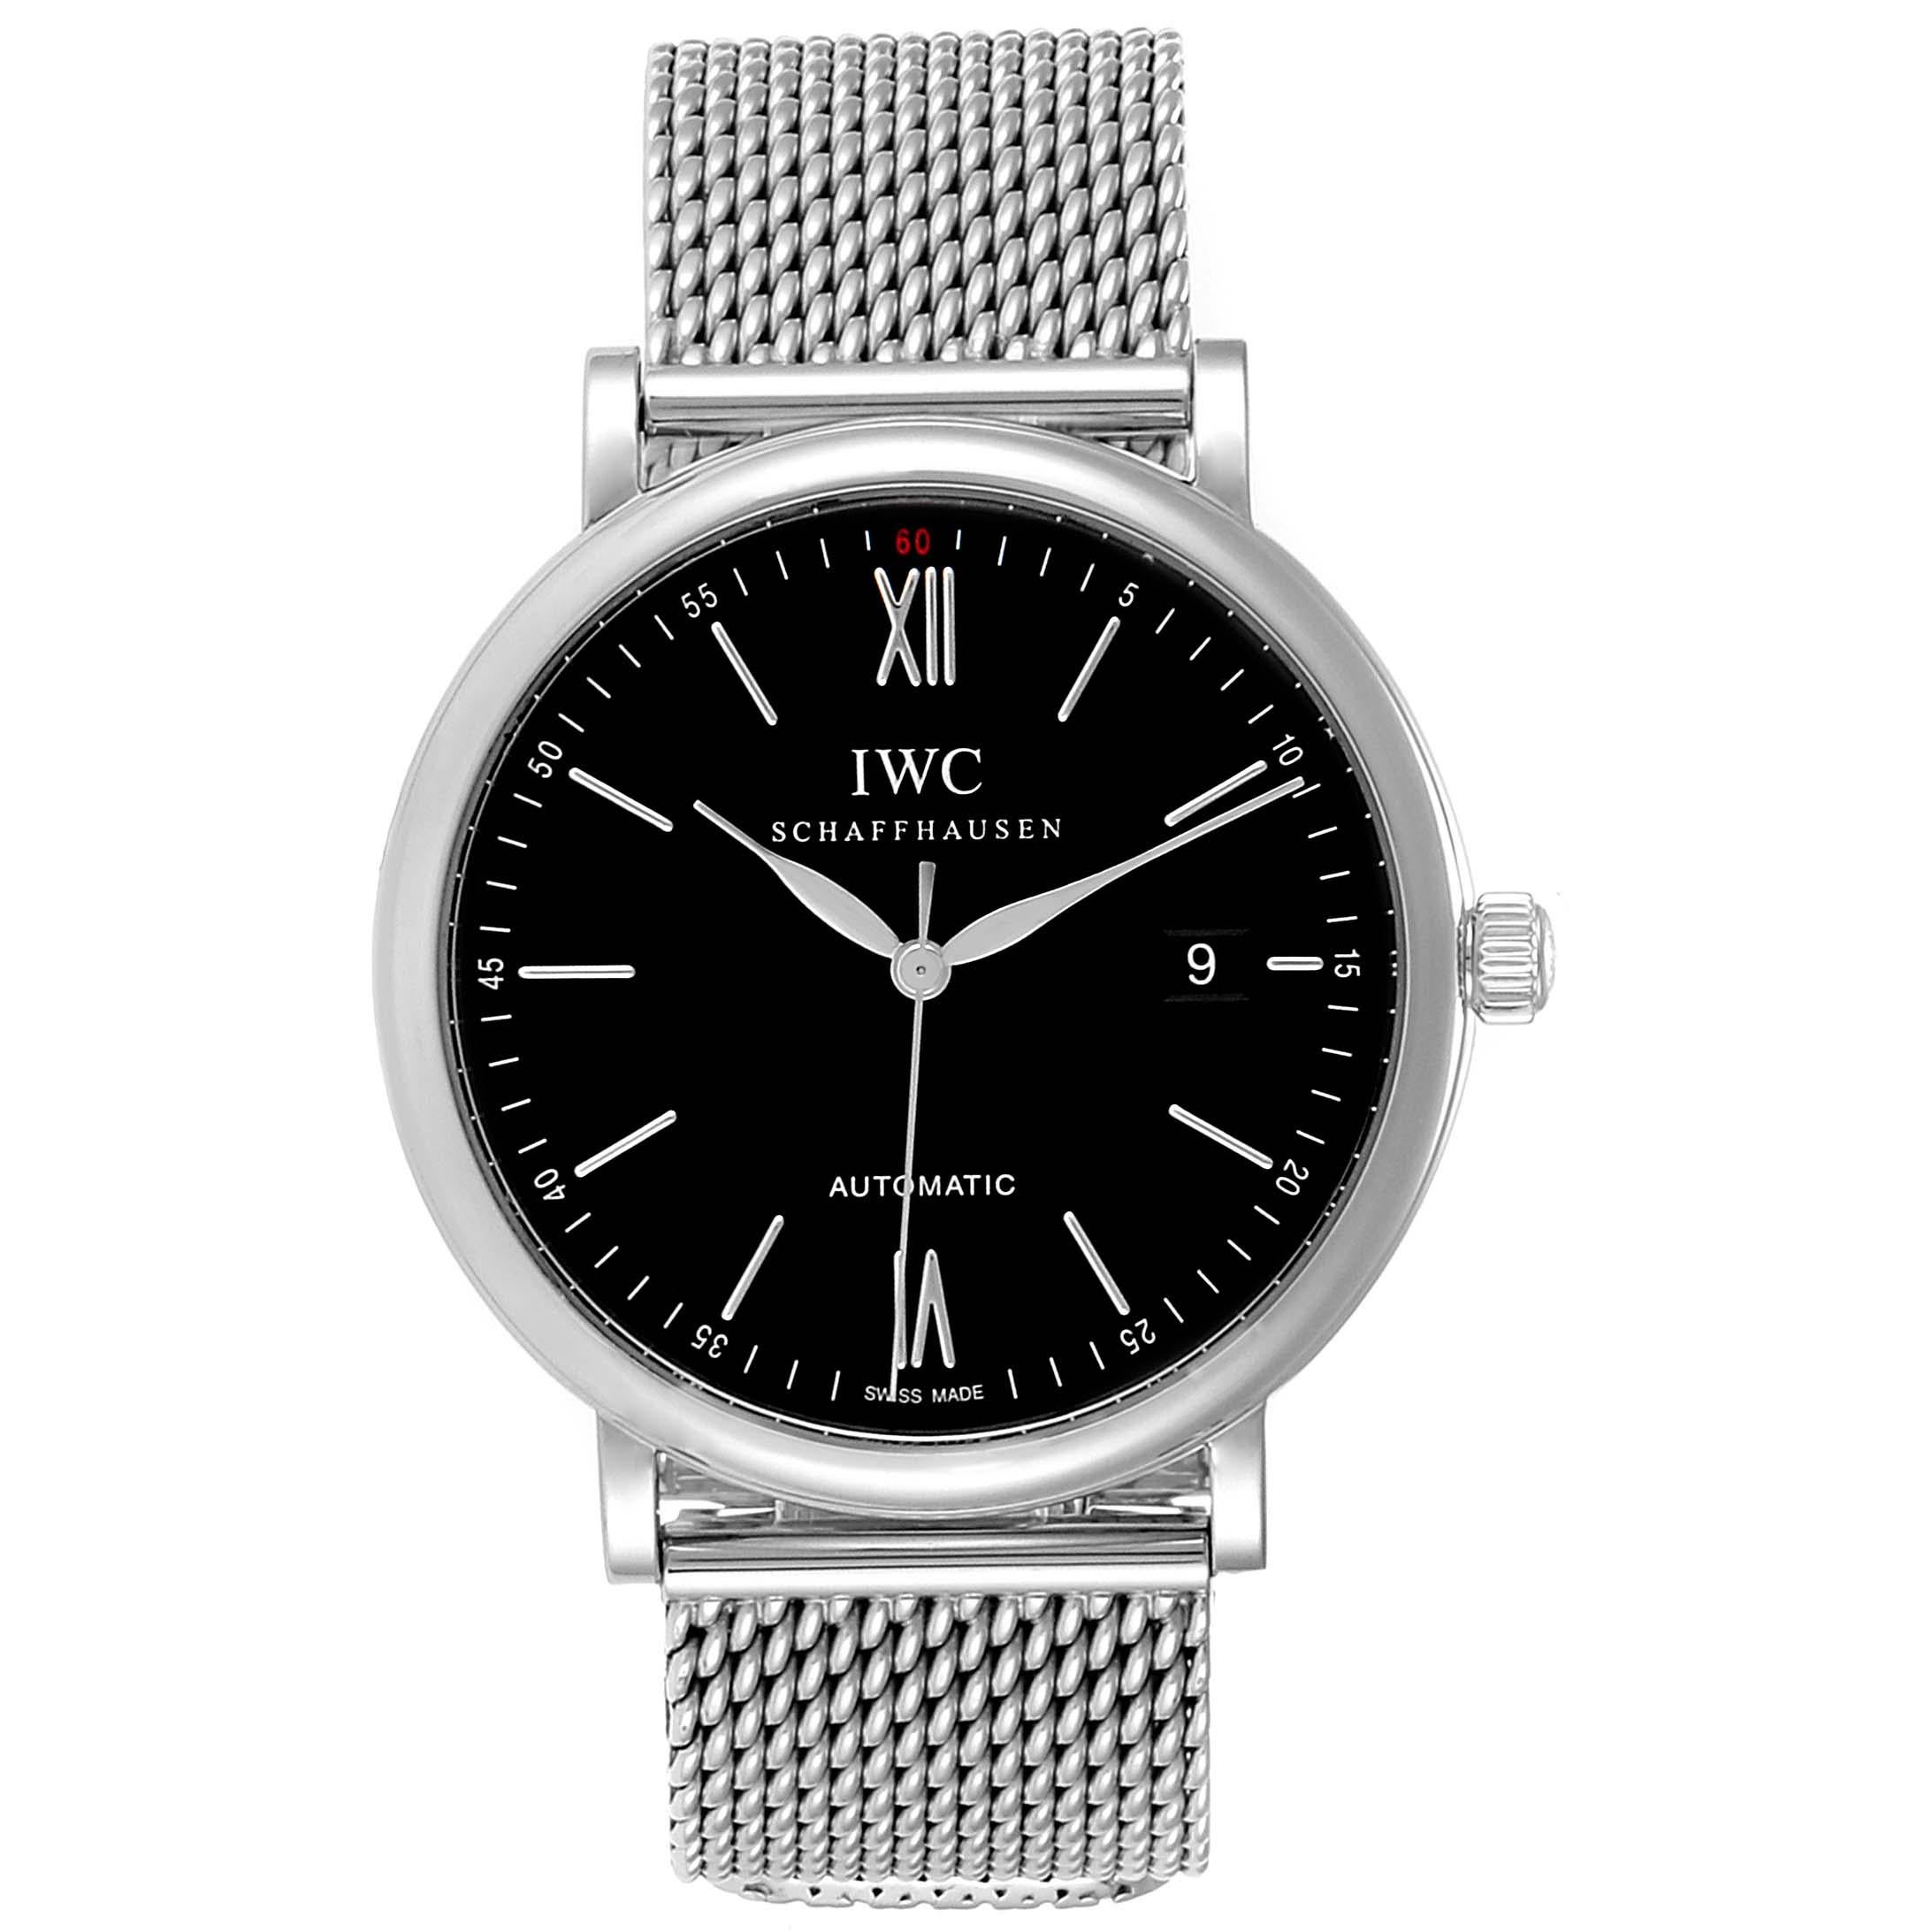 IWC Portofino Black Dial Mesh Bracelet Steel Mens Watch IW356506. Automatic self-winding movement. Stainless steel case 40 mm in diameter. Stainless steel bezel. Scratch resistant sapphire crystal. Black dial with steel baton hour markers and roman